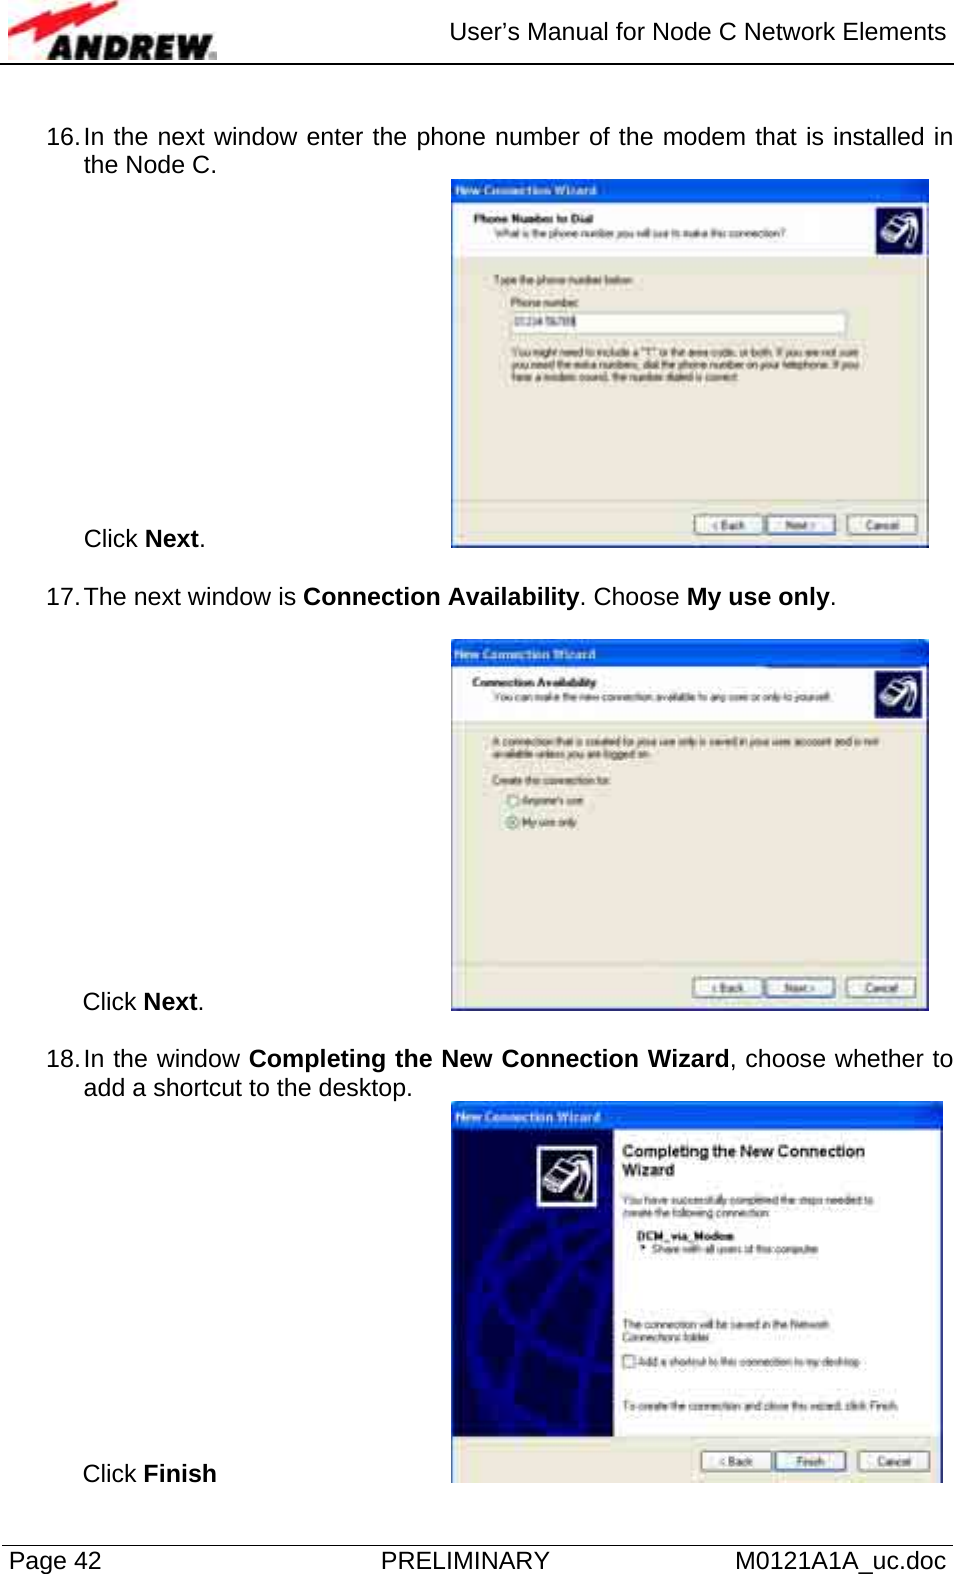  User’s Manual for Node C Network Elements Page 42  PRELIMINARY M0121A1A_uc.doc  16. In the next window enter the phone number of the modem that is installed in the Node C.  Click Next.       17. The next window is Connection Availability. Choose My use only.   Click Next.       18. In the window Completing the New Connection Wizard, choose whether to add a shortcut to the desktop. Click Finish      